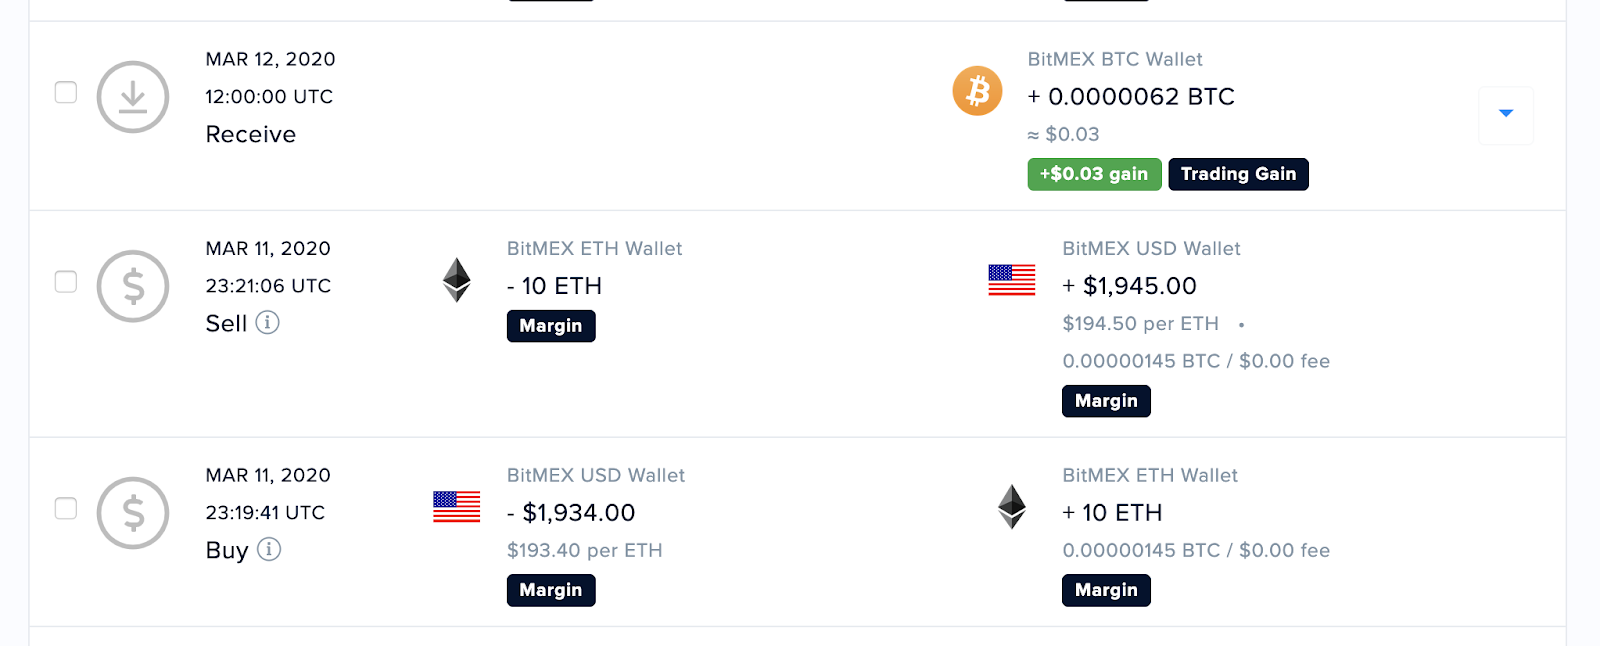 BitMEX futures reflected on CoinTracker's transaction page